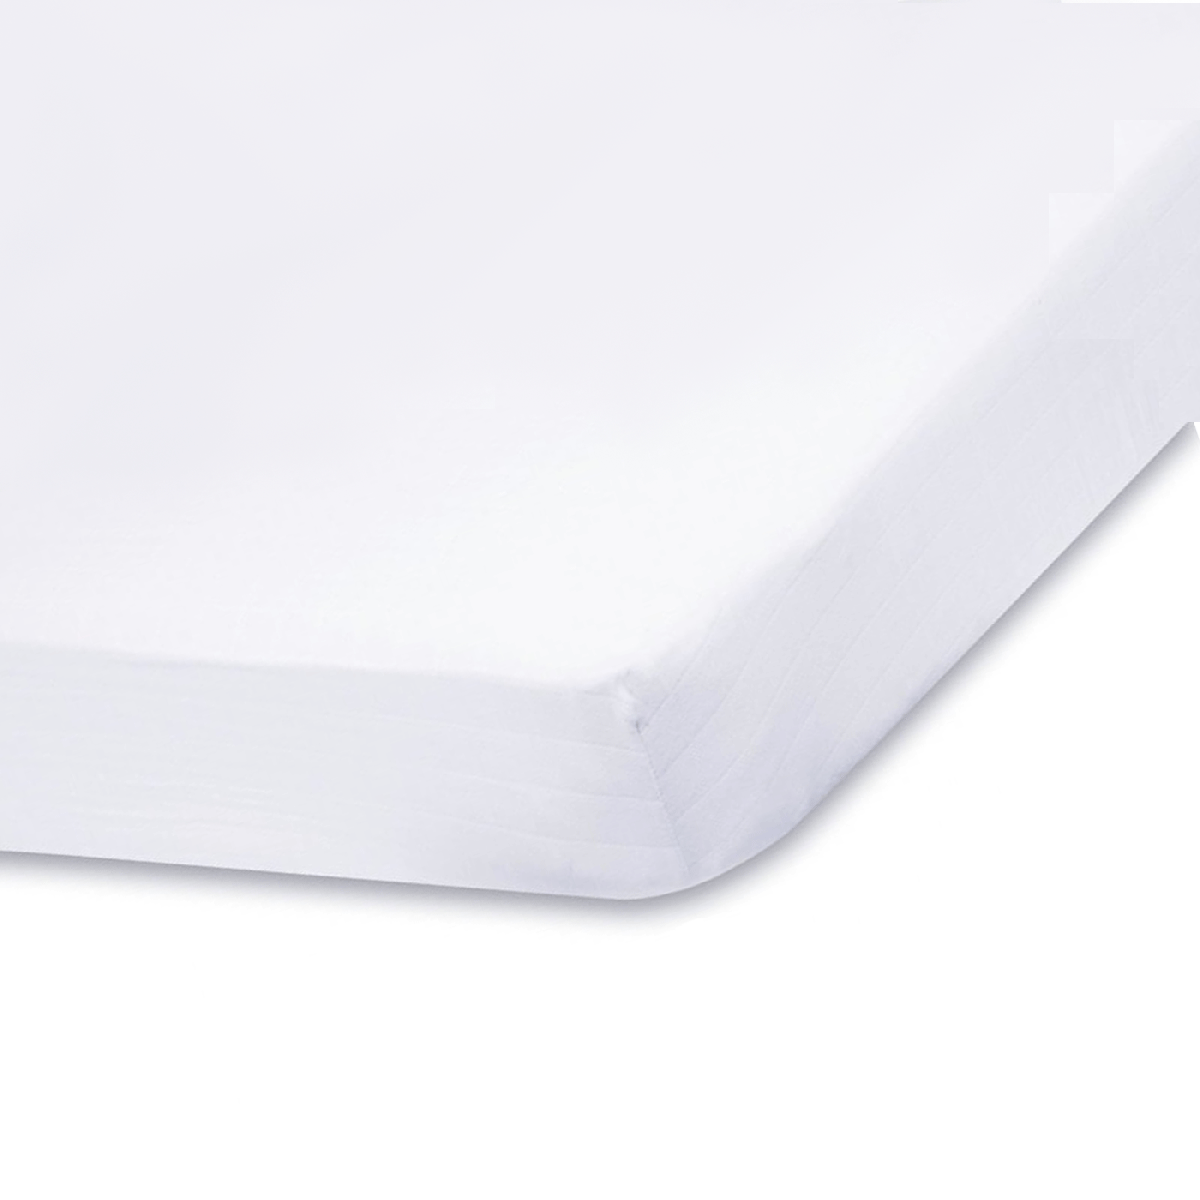 2 Pack Cot Sheets 100% Cotton Jersey - White, 60x120 cm